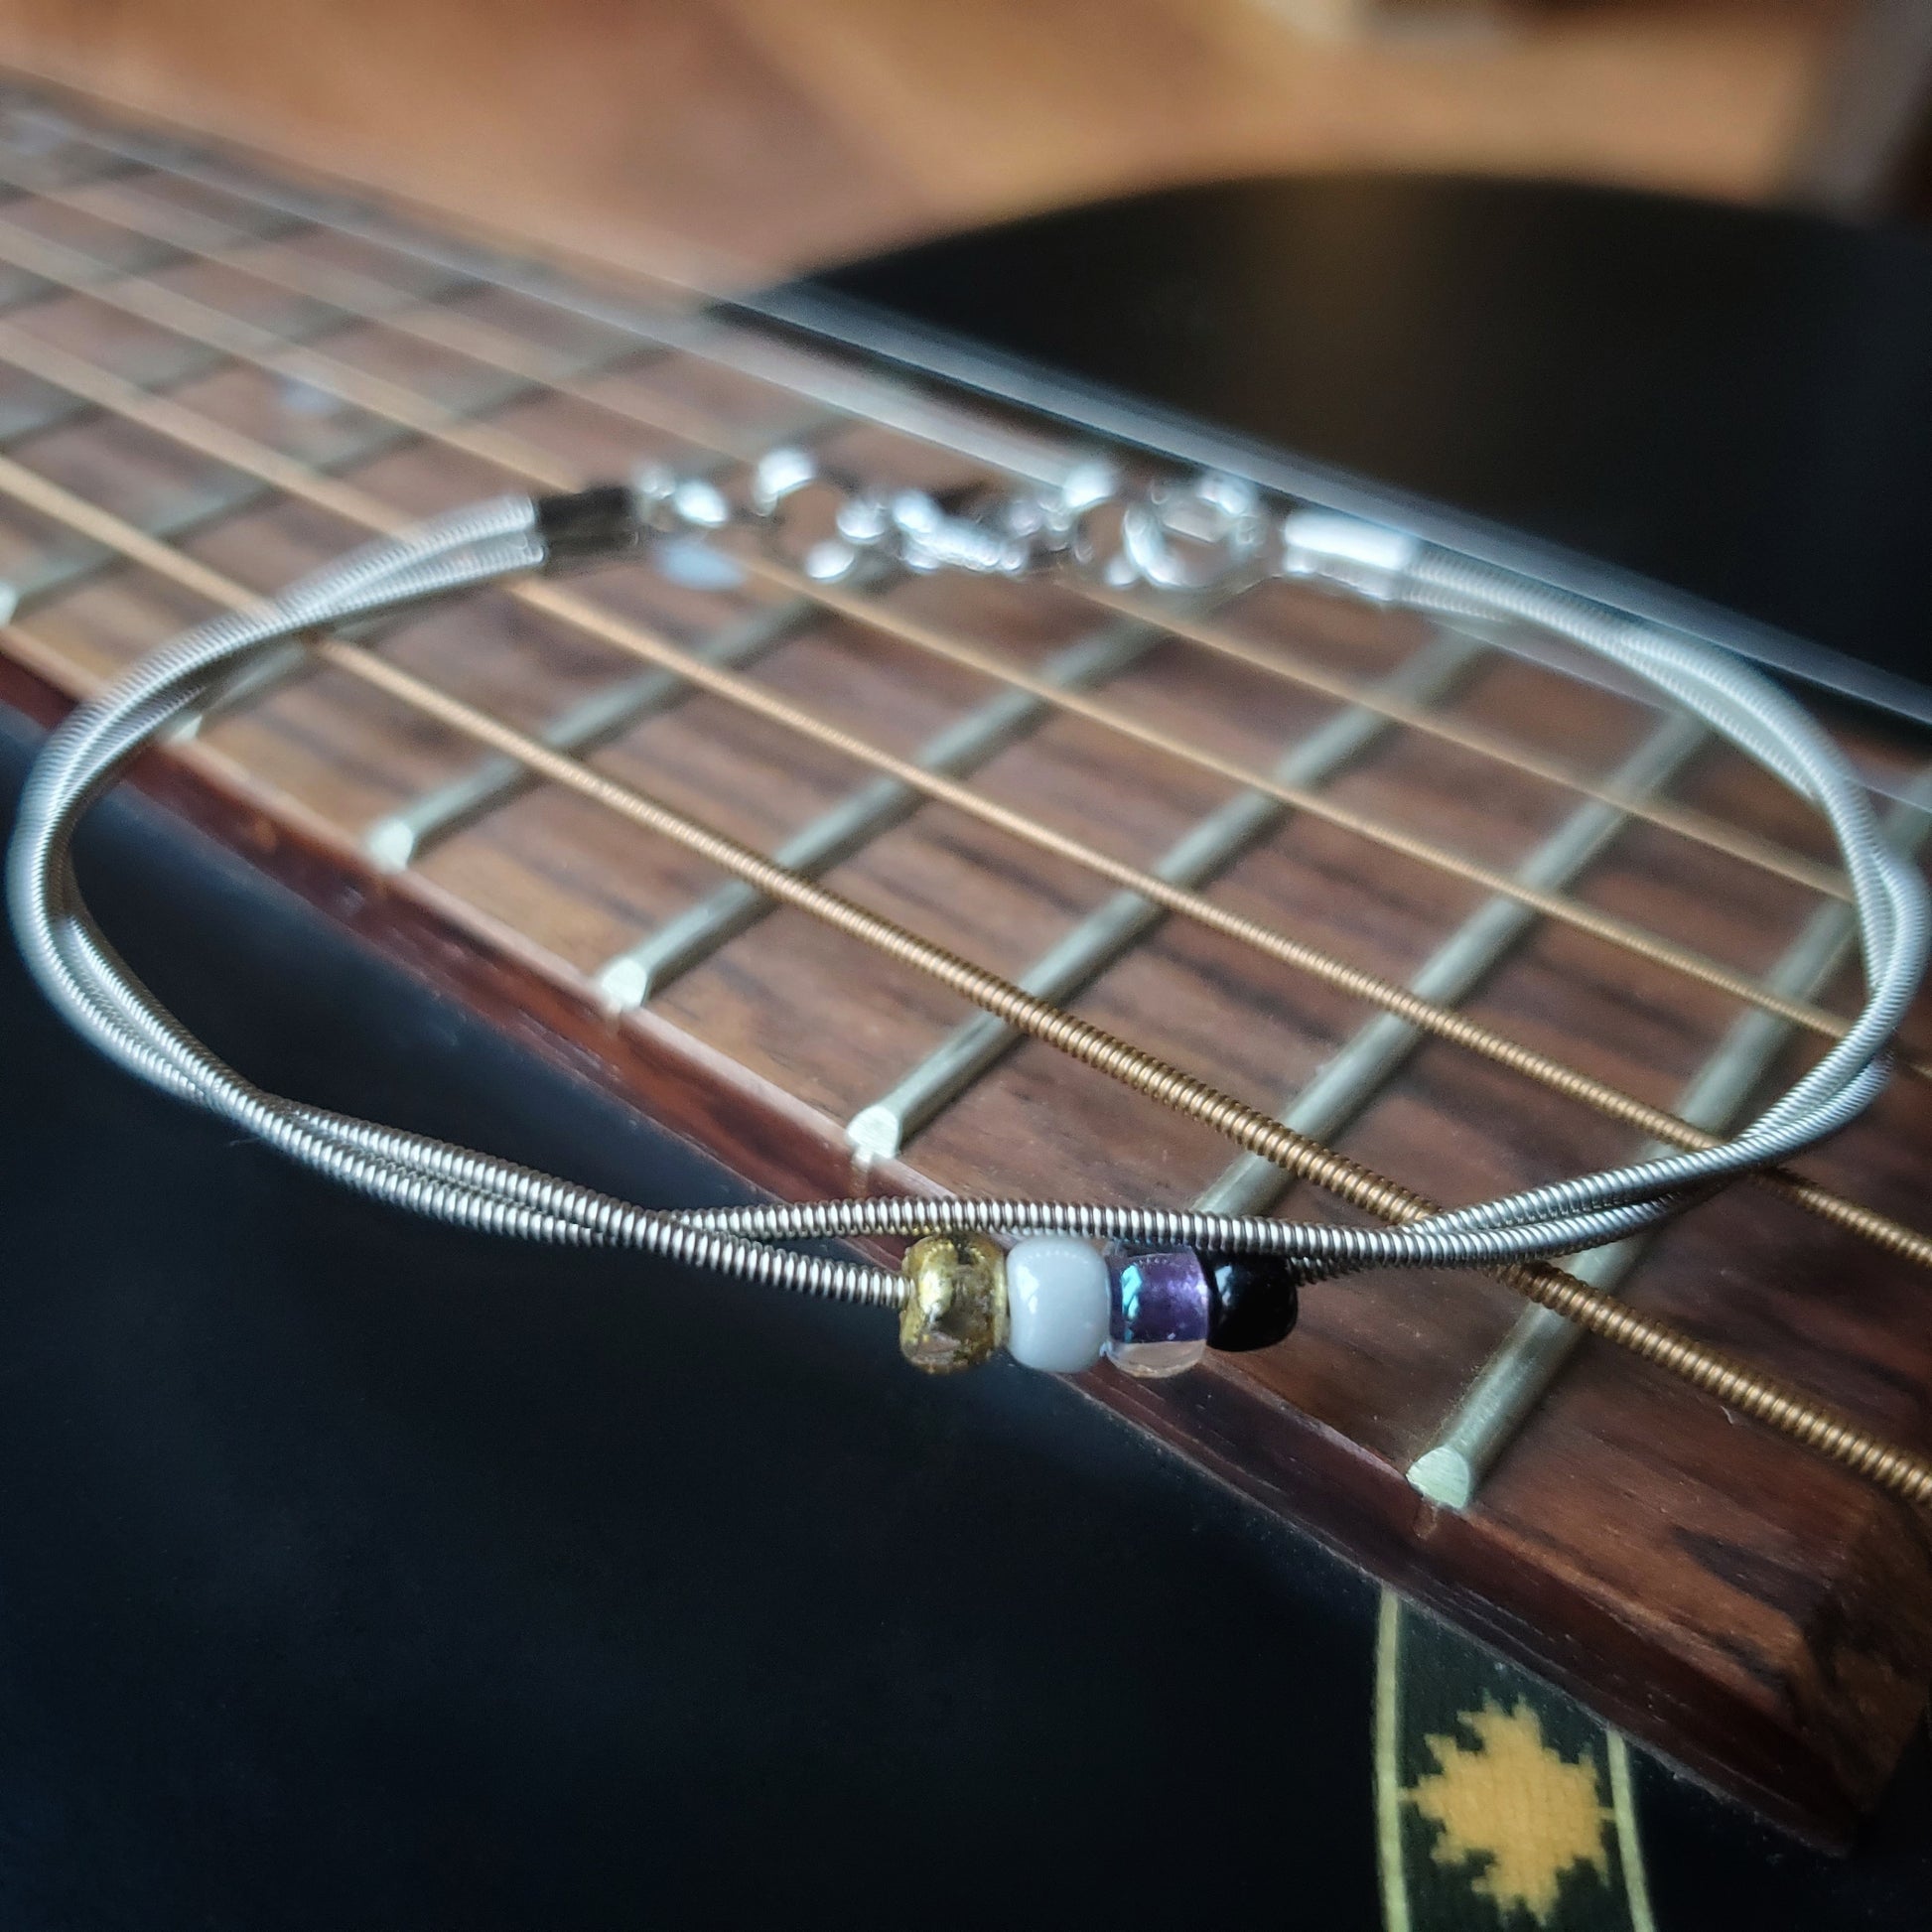 silver coloures clasp style bracelet with 4 glass beads representing the non-binary flag (yellow, white, purple & black) -bracelet is on a black guitar